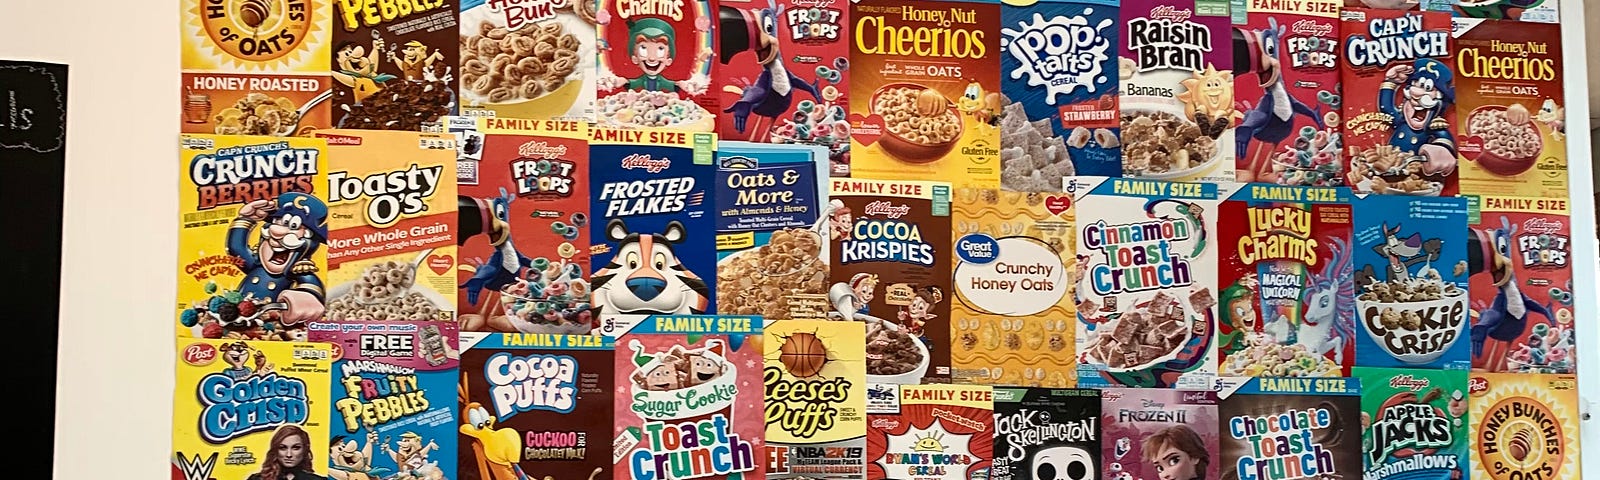 Cereal box covers on wall